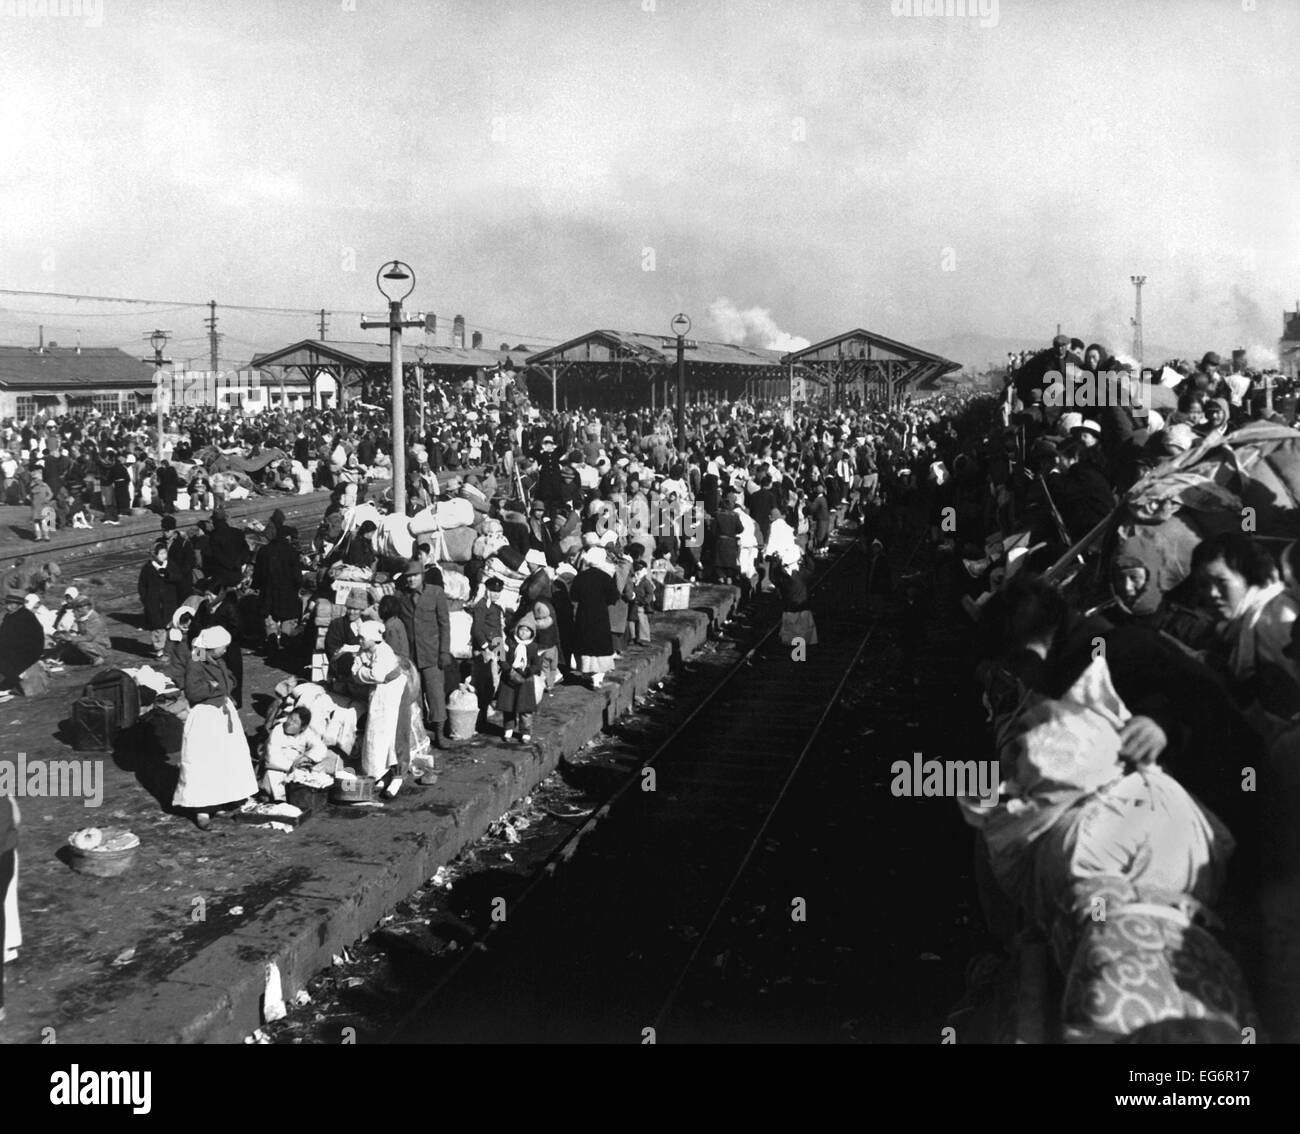 Refugees crowd railway depot at Inchon, Korea, Jan. 3, 1951. They are fleeing the advancing North Korean/Chinese troops after Stock Photo